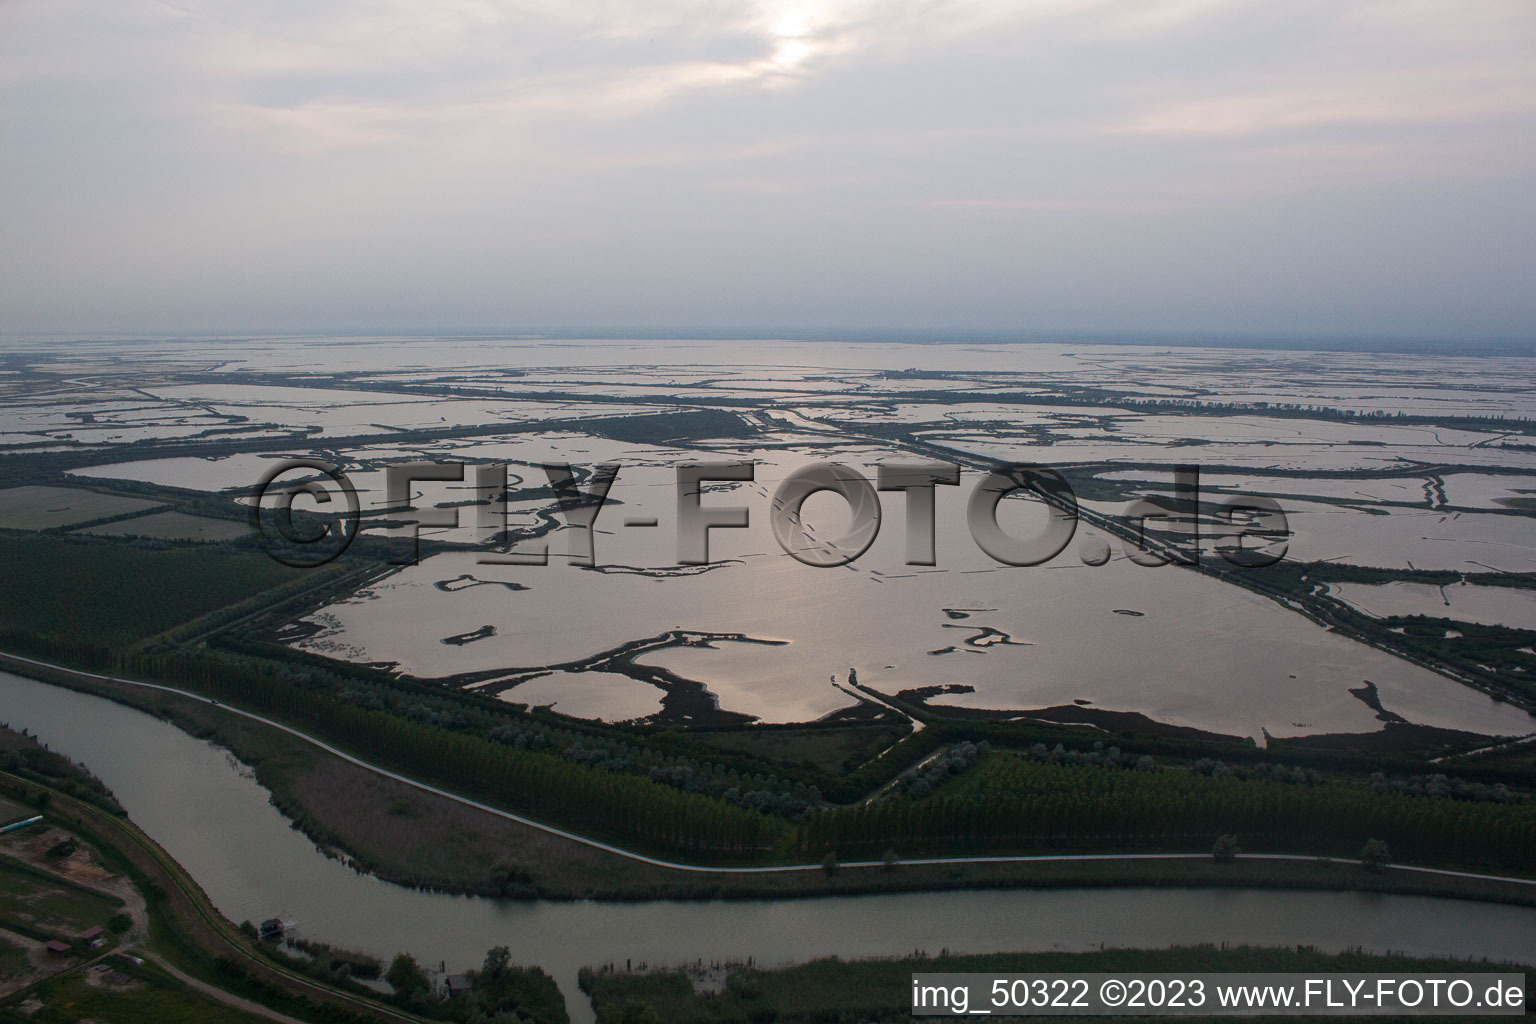 Aerial photograpy of Jesolo in the state Veneto, Italy